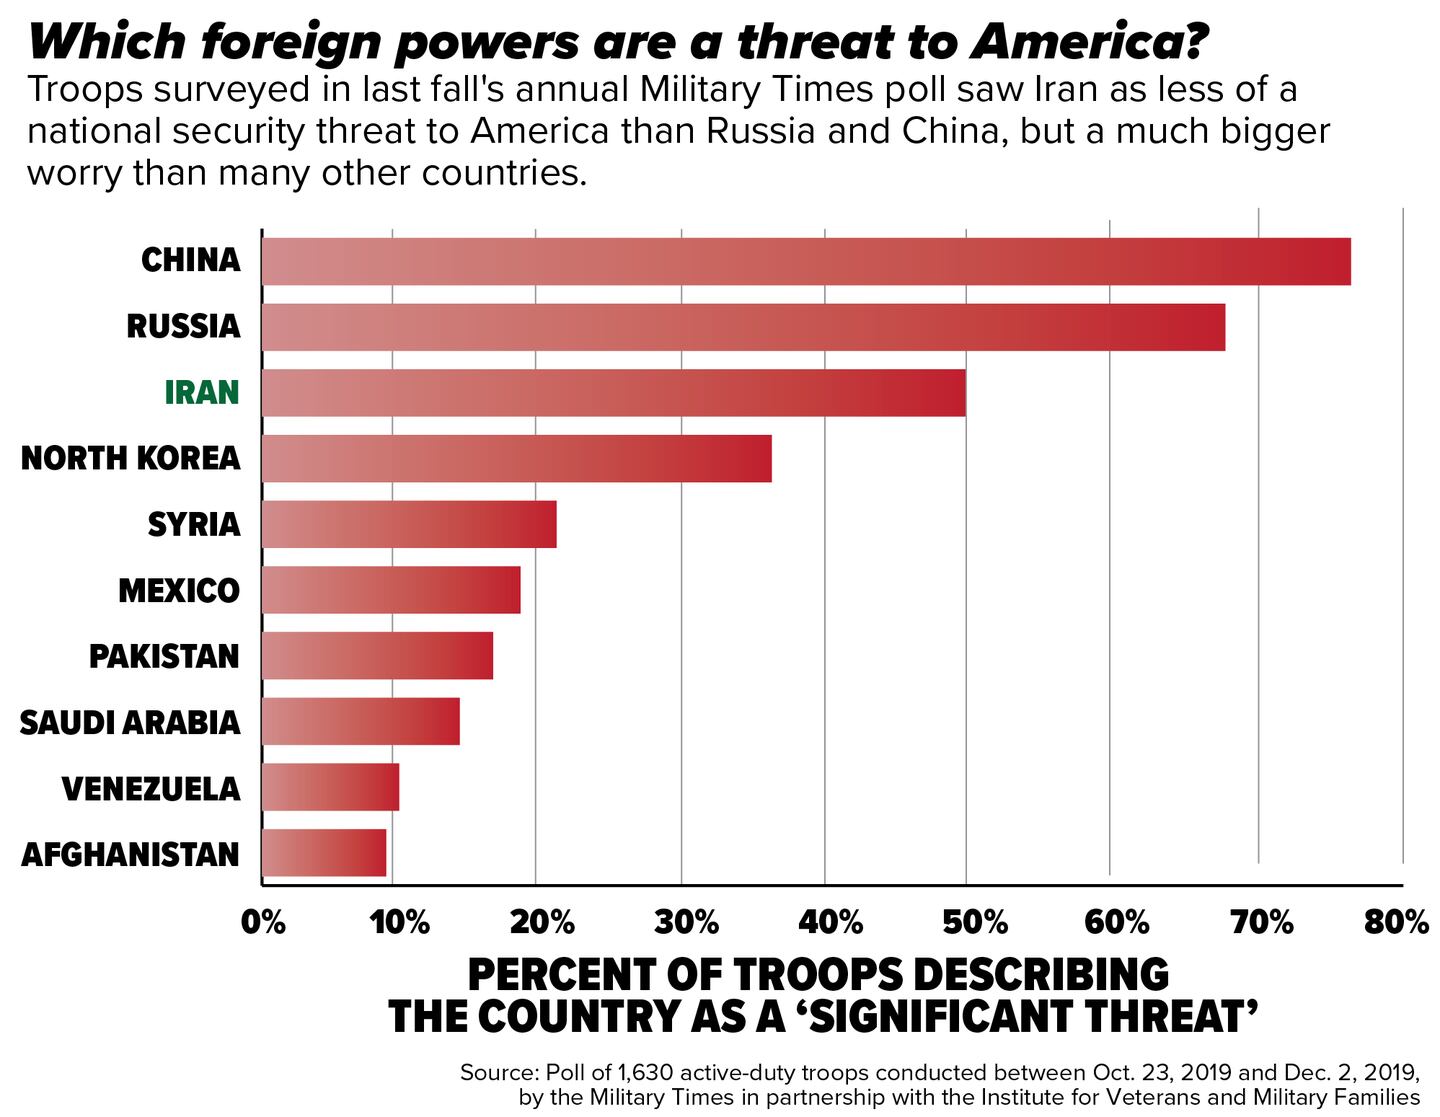 Which foreign powers are a threat to America? 
Troops surveyed in last fall's annual Military Times poll saw Iran as less of a national security threat to America than Russia and China, but a much bigger worry than many other countries.